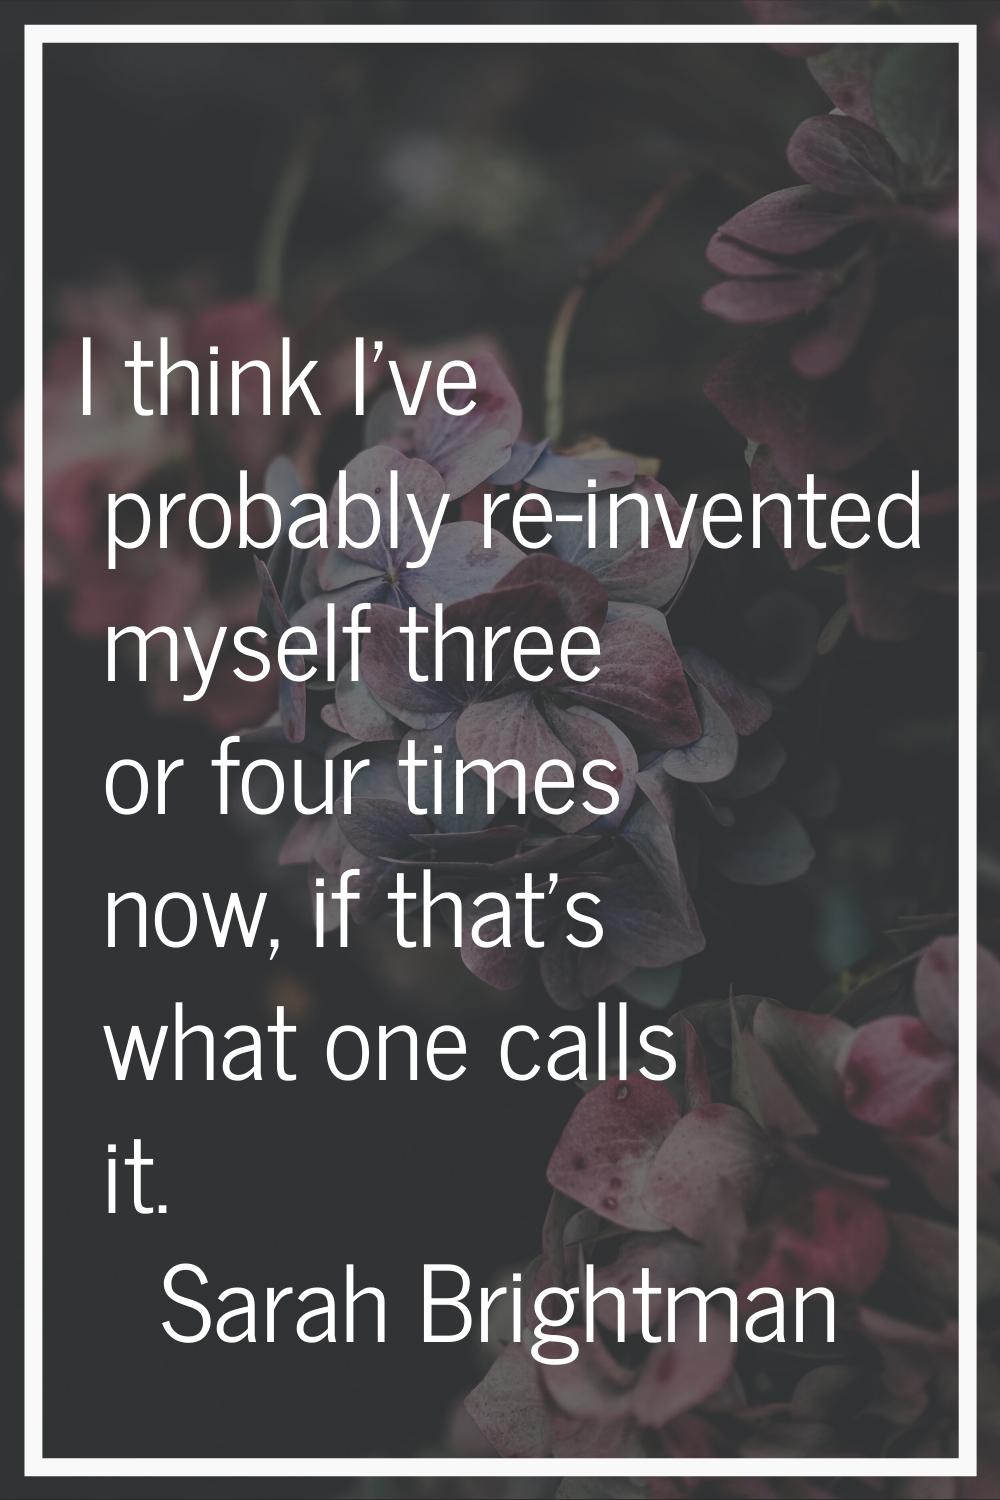 I think I've probably re-invented myself three or four times now, if that's what one calls it.